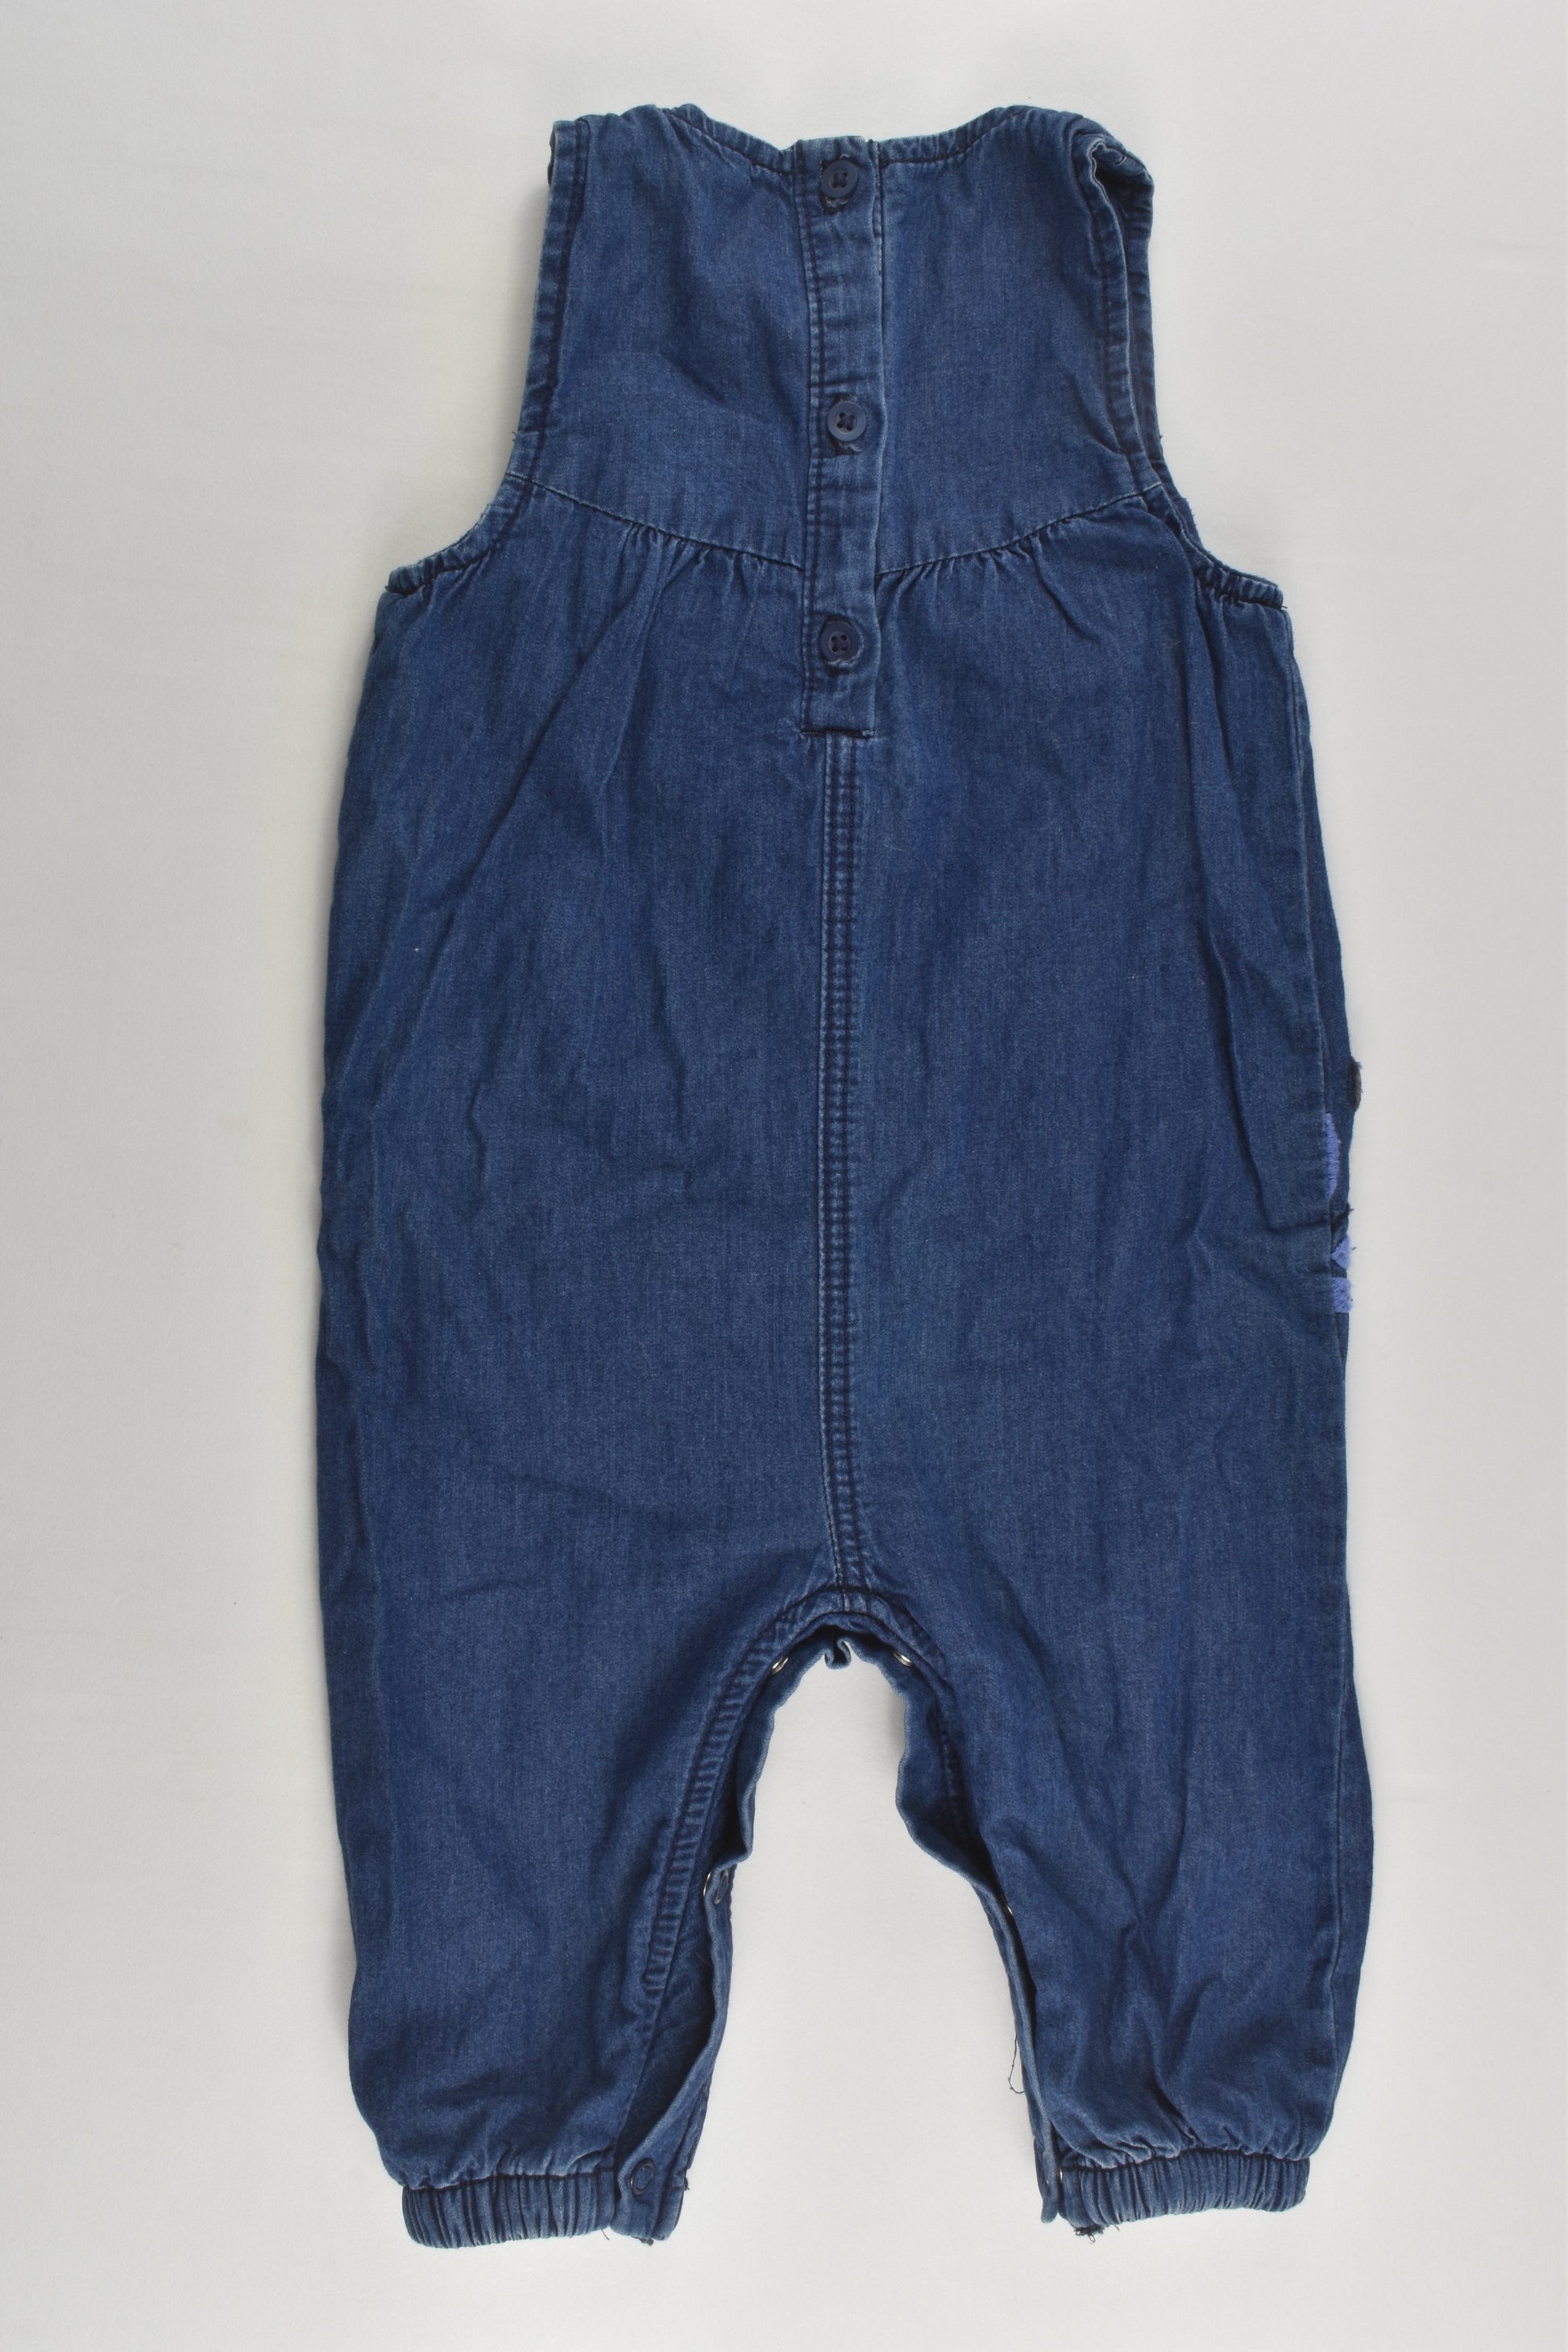 George Size 0 (6-9 months) 'You Are So Loved' Lined Denim Overalls